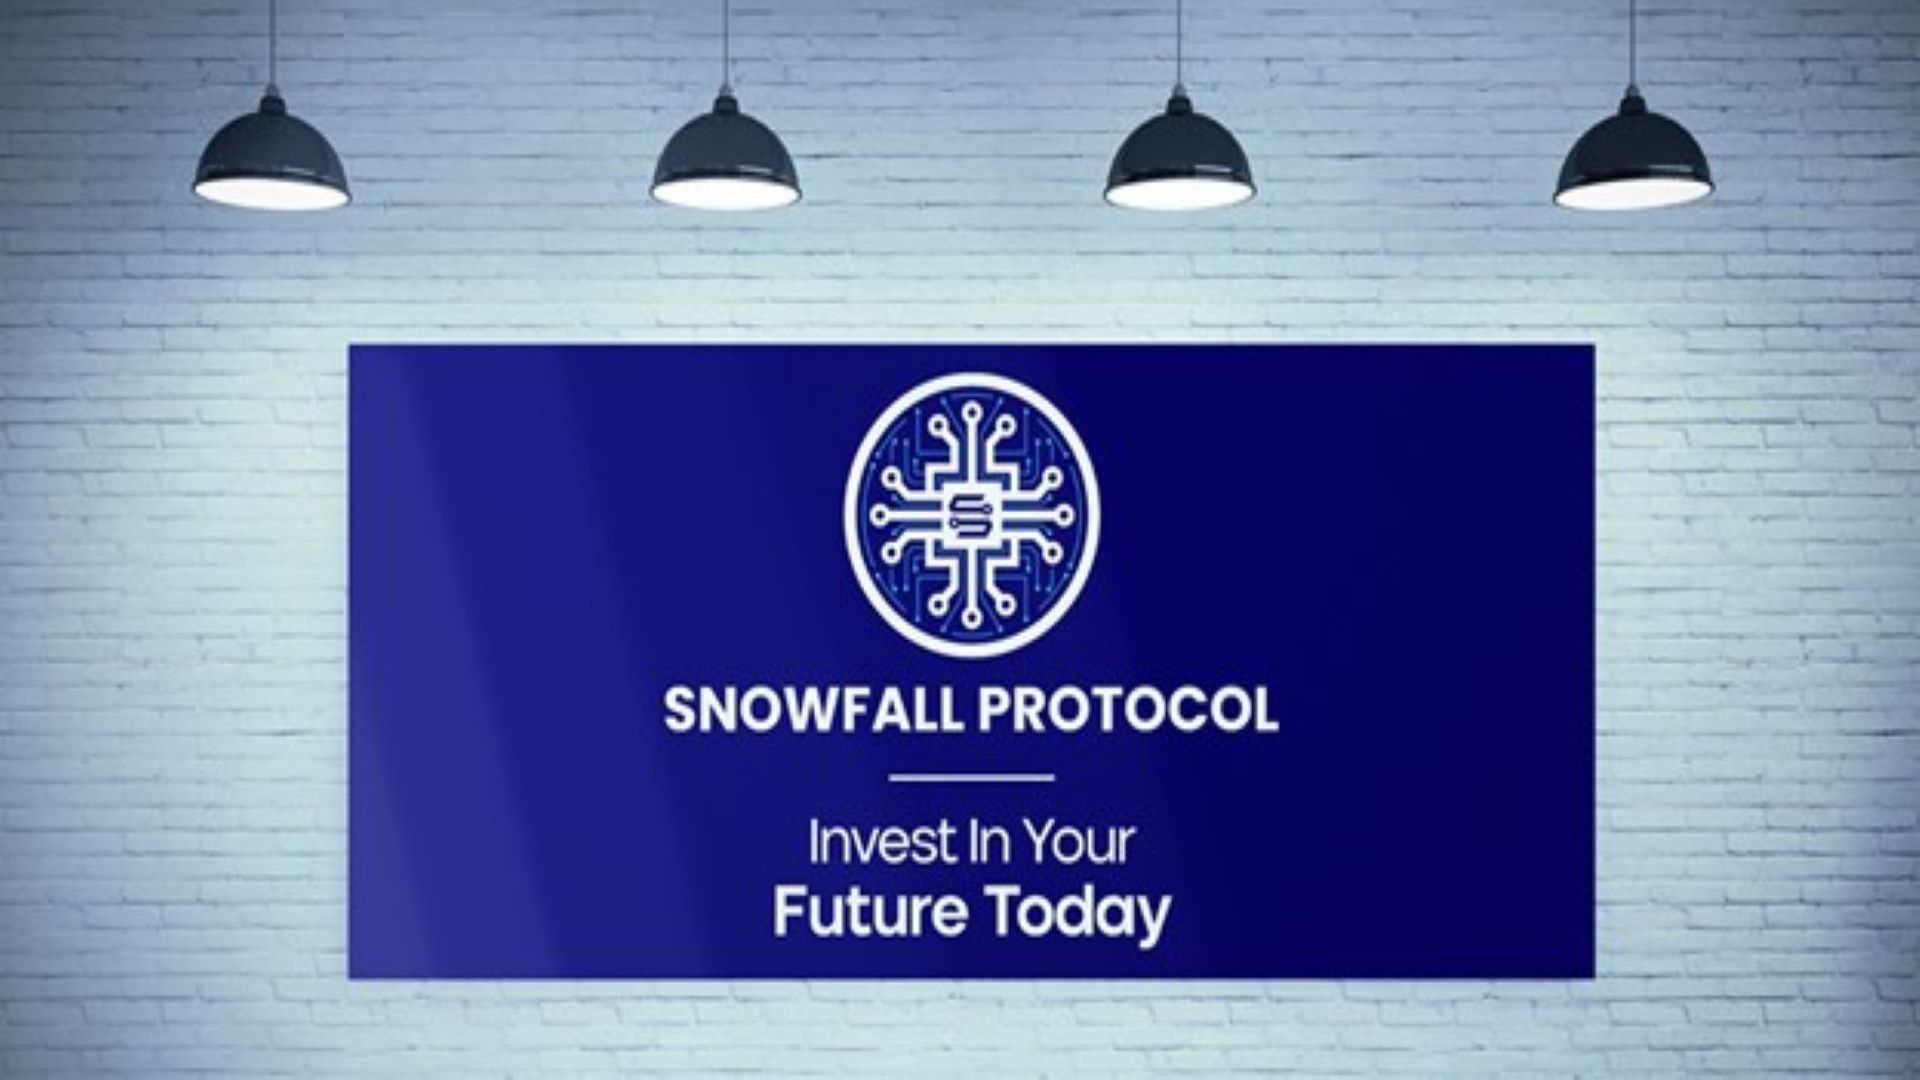 Avalanche’s (AVAX) Core Wallet Goes Mobile With Android Launch, Syntropy switches from Polkadot (DOT) to Cosmos for Web3 development, Snowfall Protocol (SNW) raises $3 million in 2 months